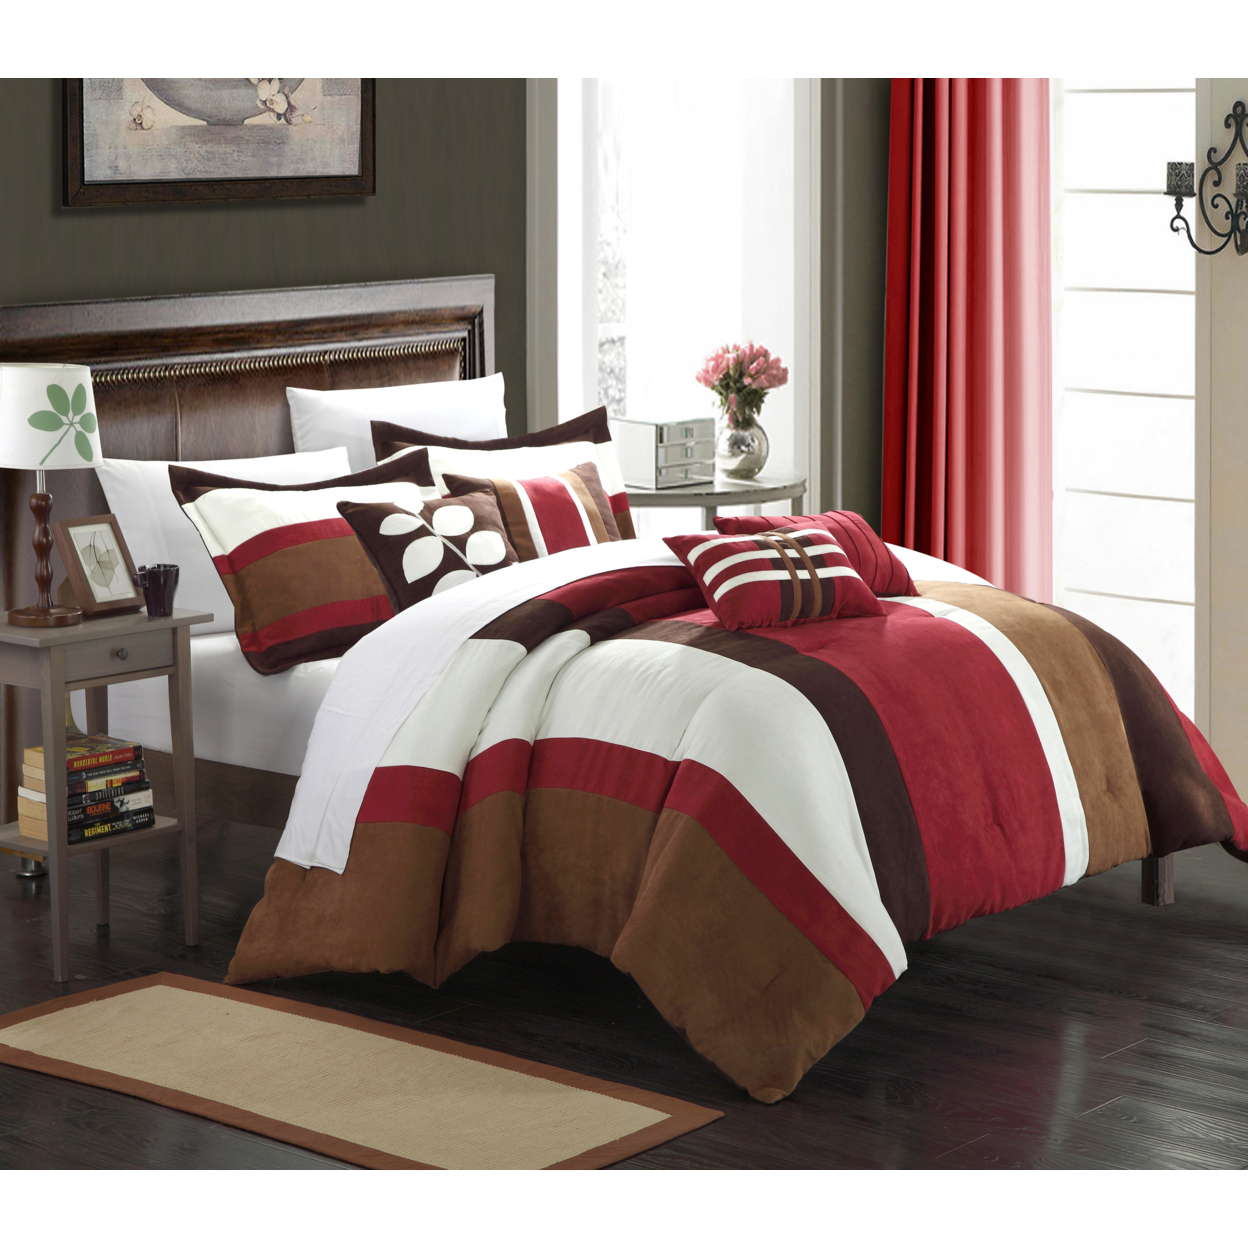 Chic Home Melodie 7-Piece Plush Microsuede Striped Comforter Set - Black, King